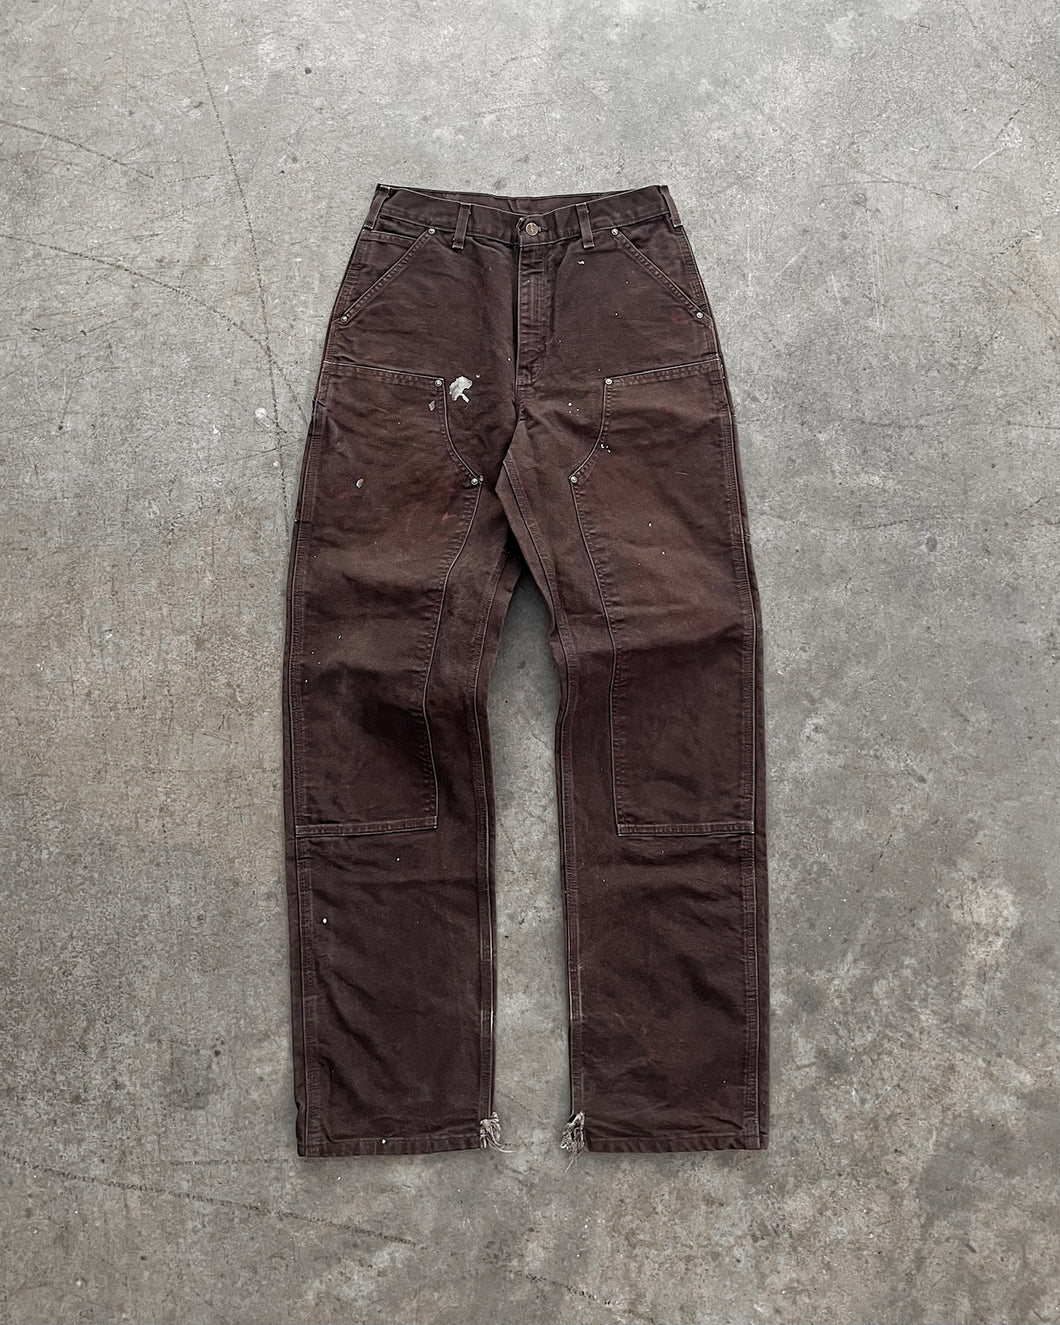 FADED BROWN PAINTERS DOUBLE KNEE CARHARTT PANTS - 1990S